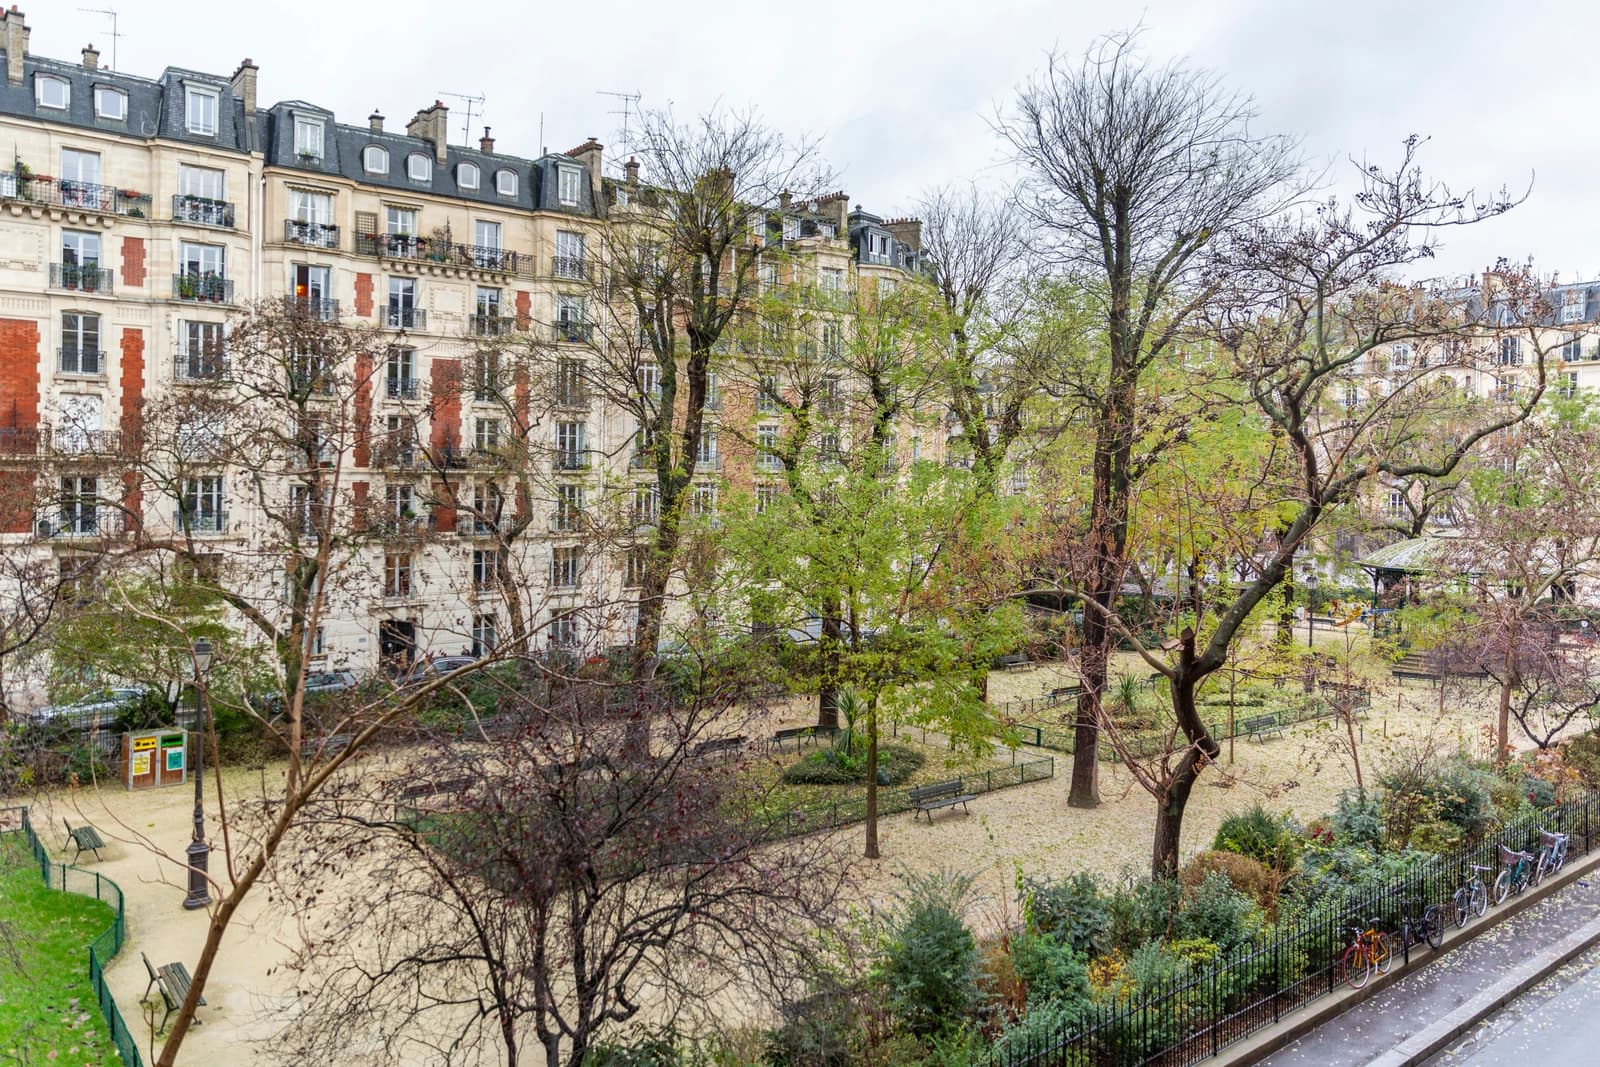 Space Haussmannian apartment overlooking tree-lined square - 4